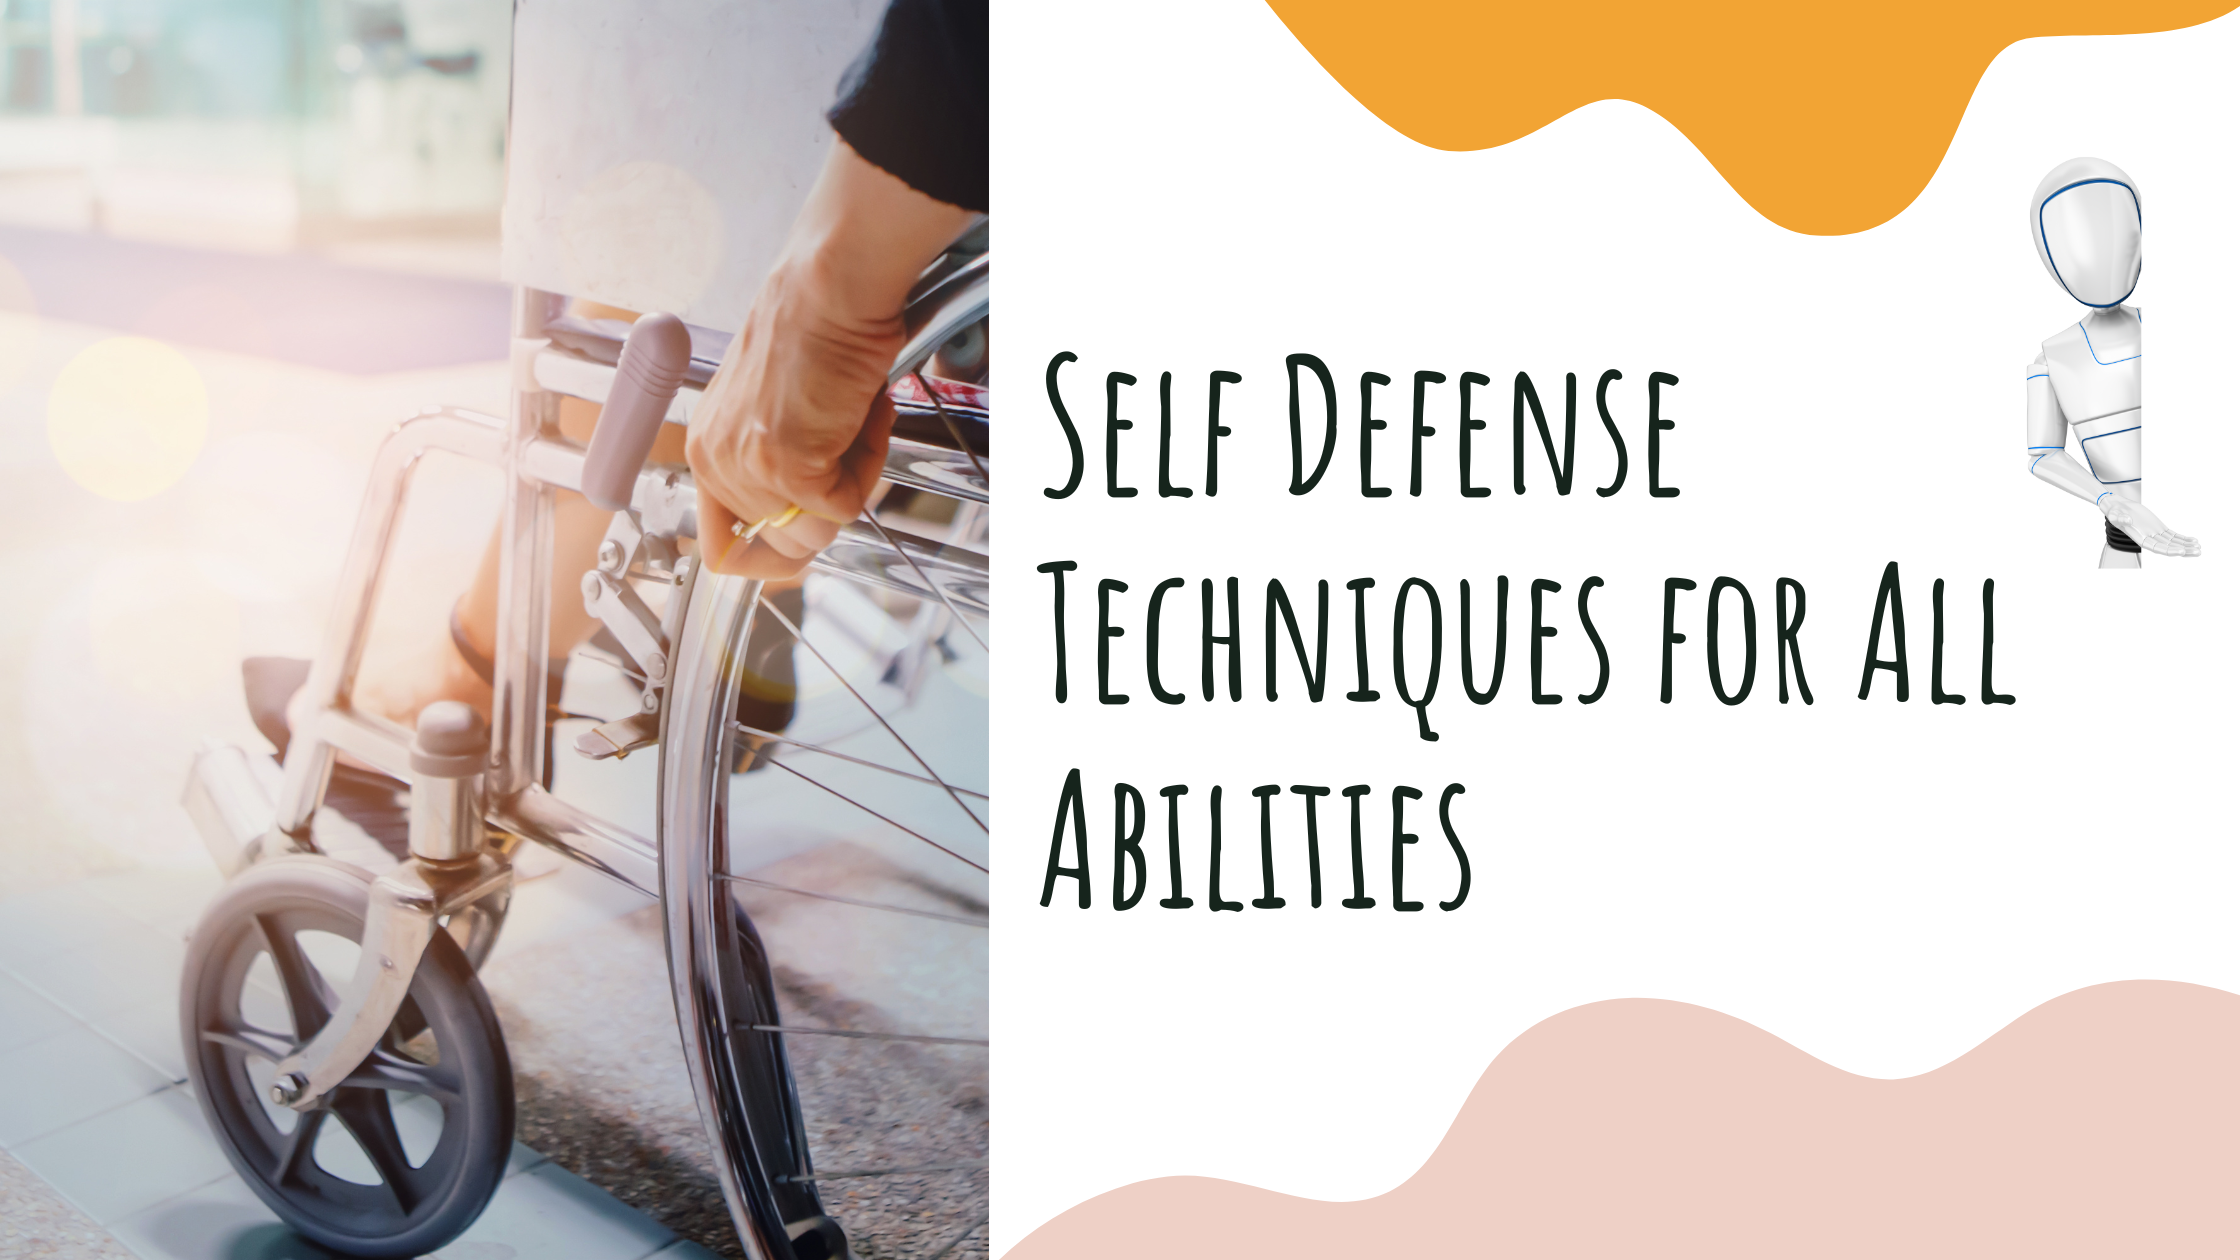 Seated Self Defense: Techniques for Wheelchair Users